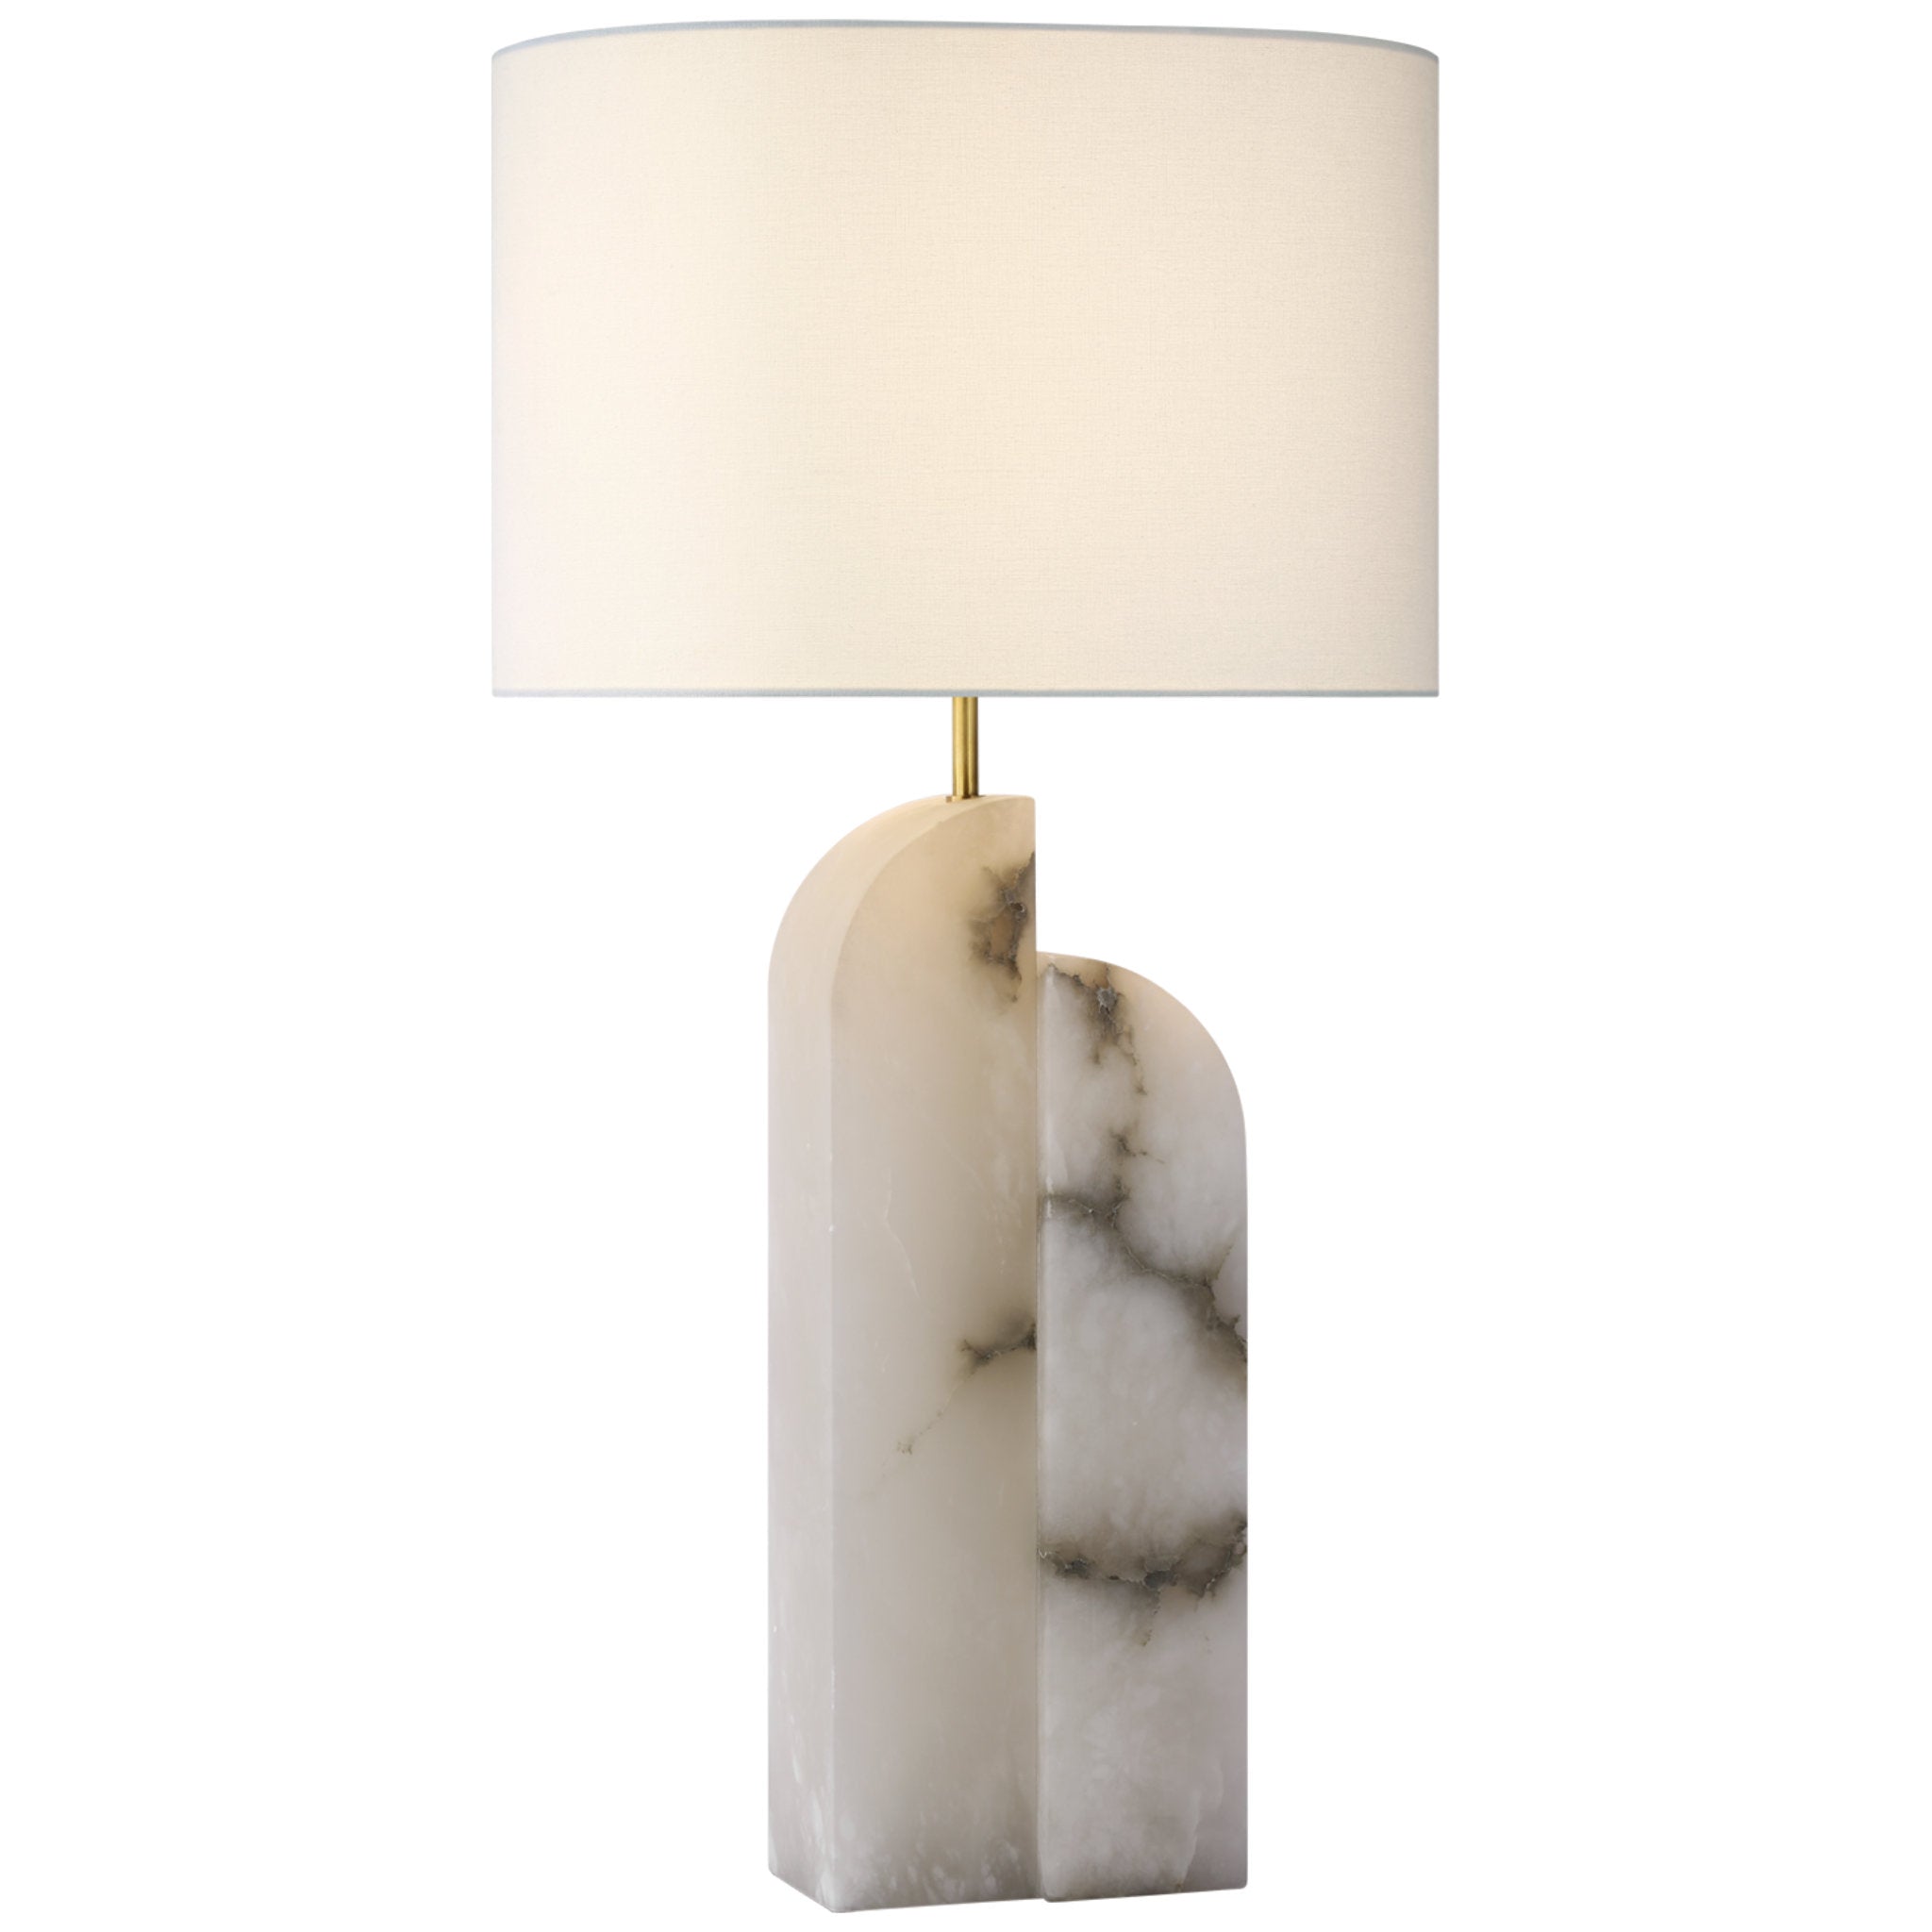 Kelly Wearstler Savoye Large Right Table Lamp in Alabaster with Linen Shade